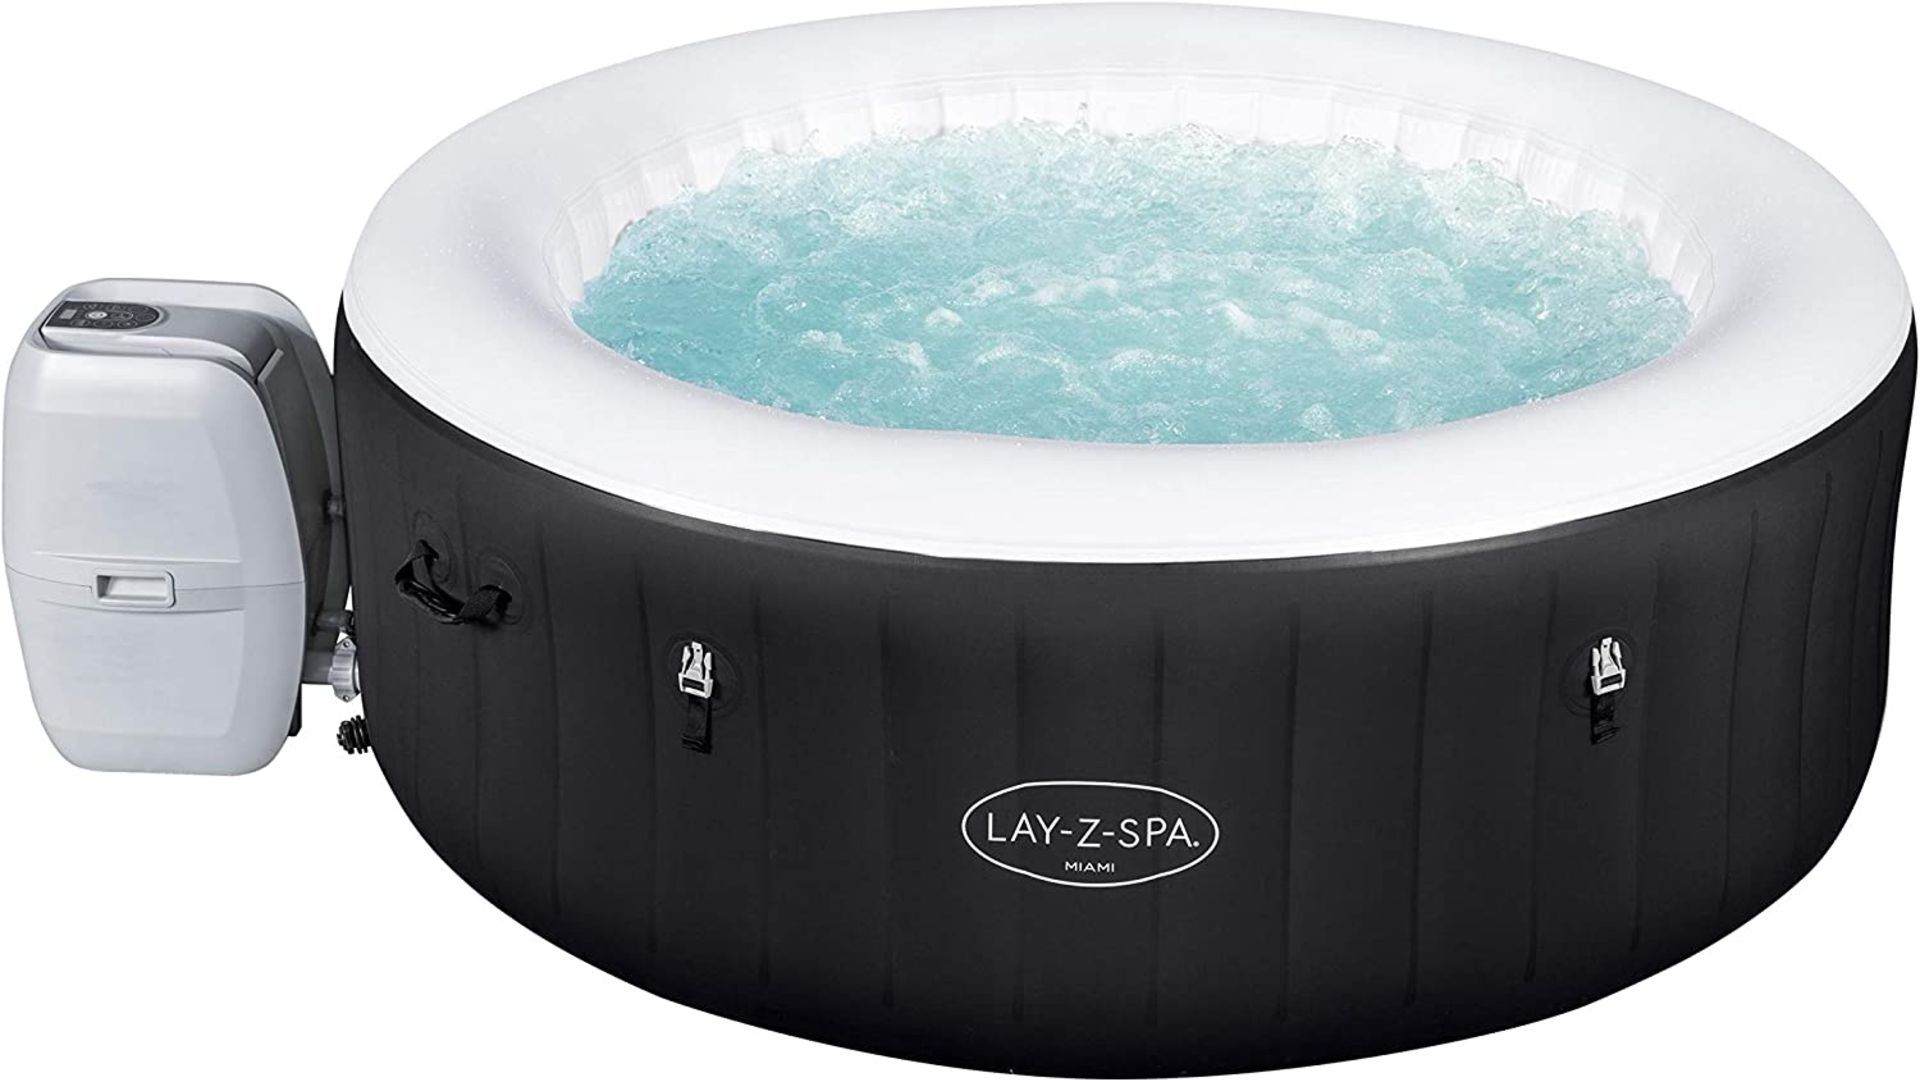 NEW & BOXED LAY-Z-SPA 4 Person MIAMI AIRJET. The highly popular Miami AirJet™ is our most affordable